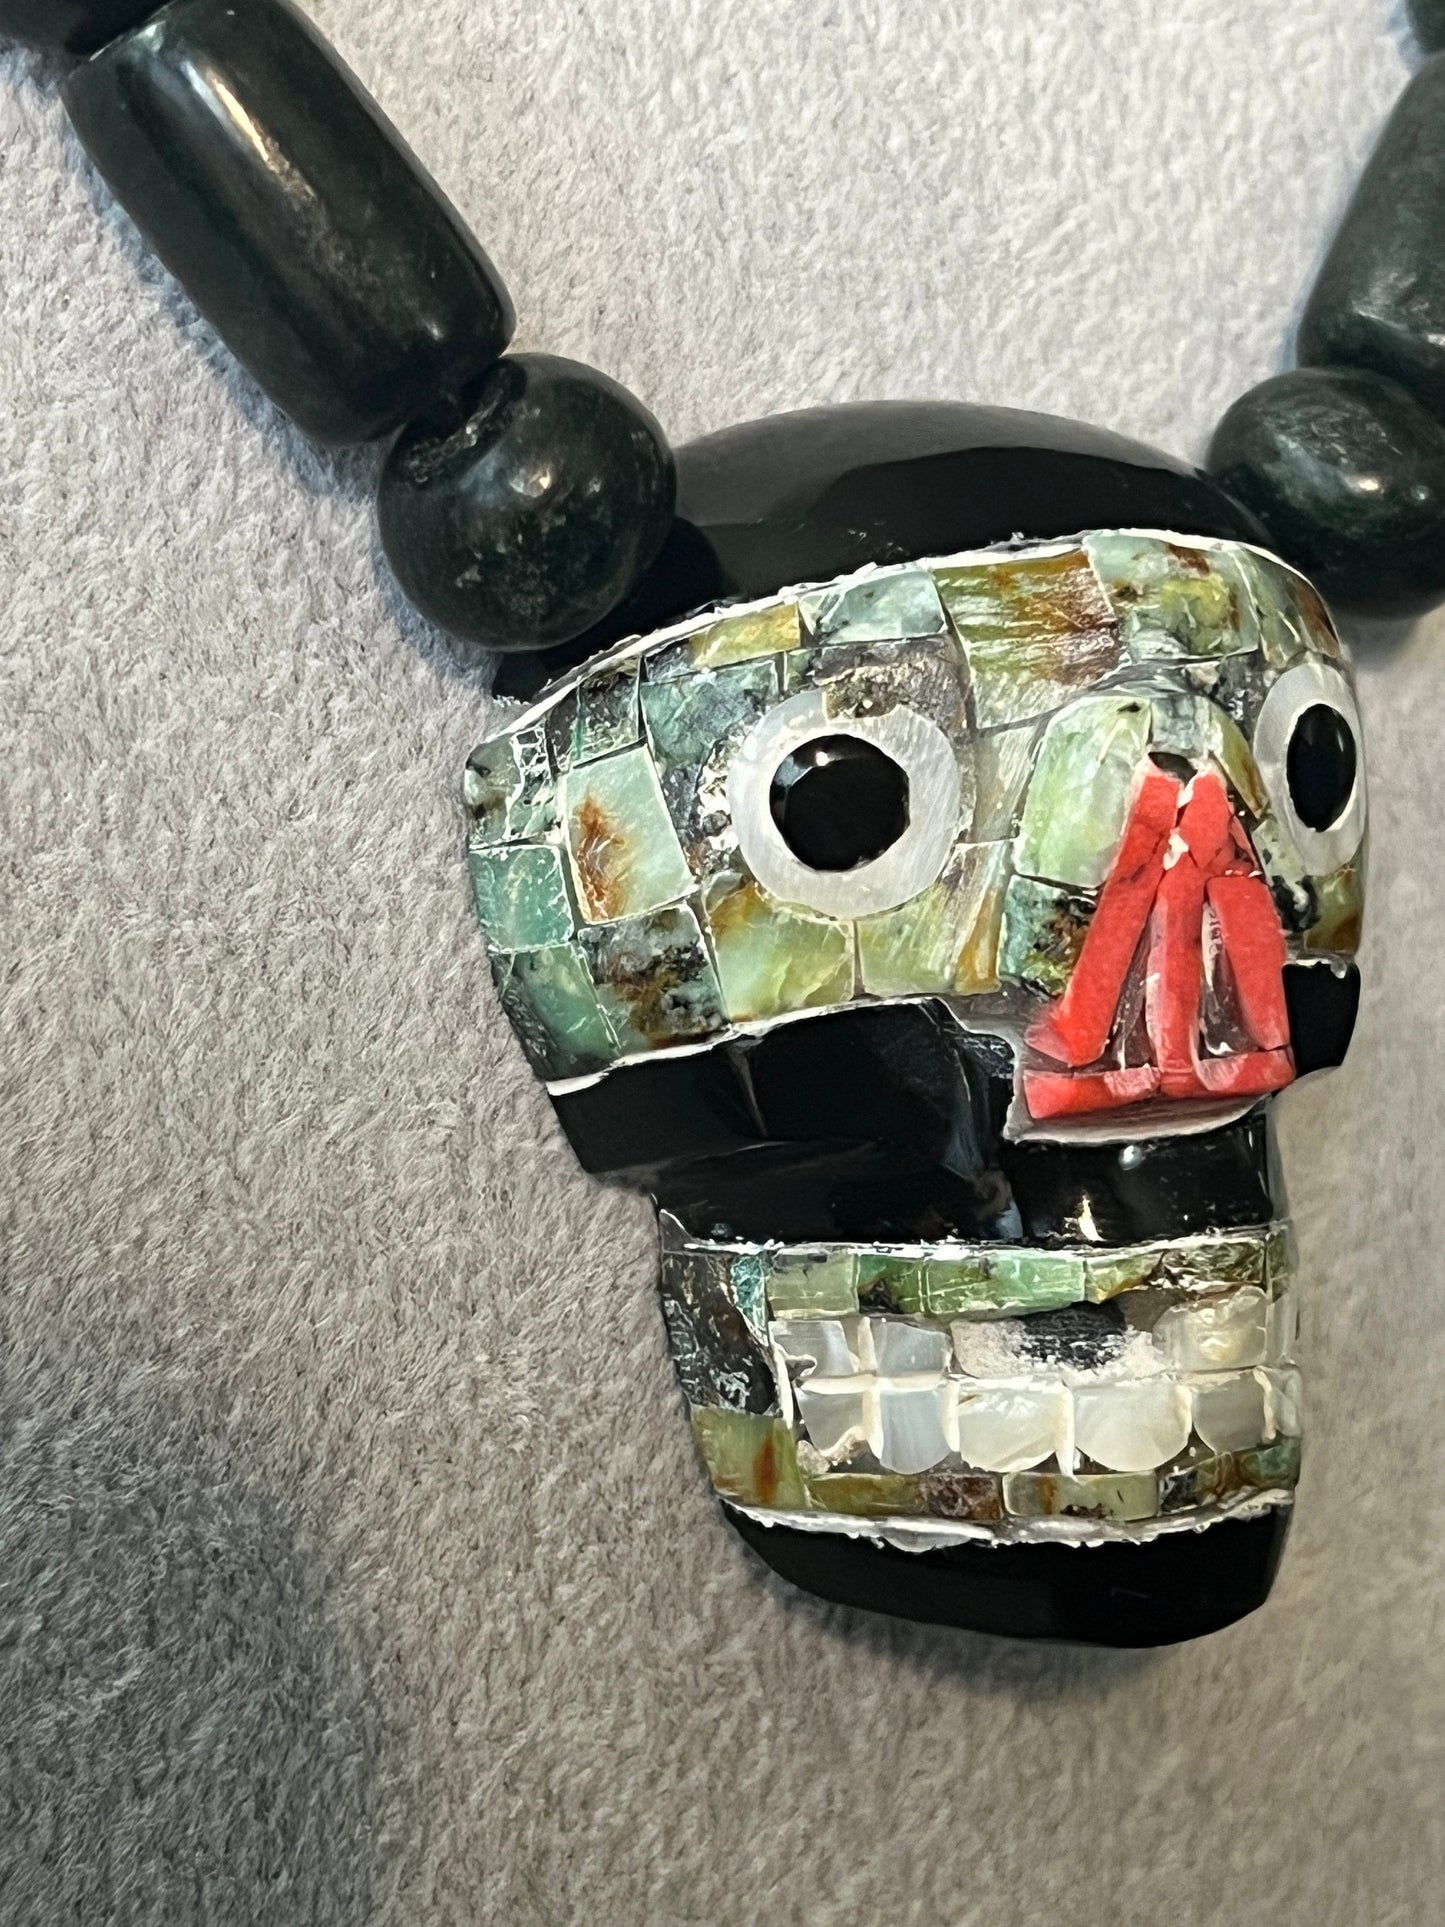 Tezcatlipoca Obsidian, Venturina, Red Coral, Mother of Pearl and Jade Necklace, Aztec Skull, Mexica, Artifact Replicas, handmade (#C)